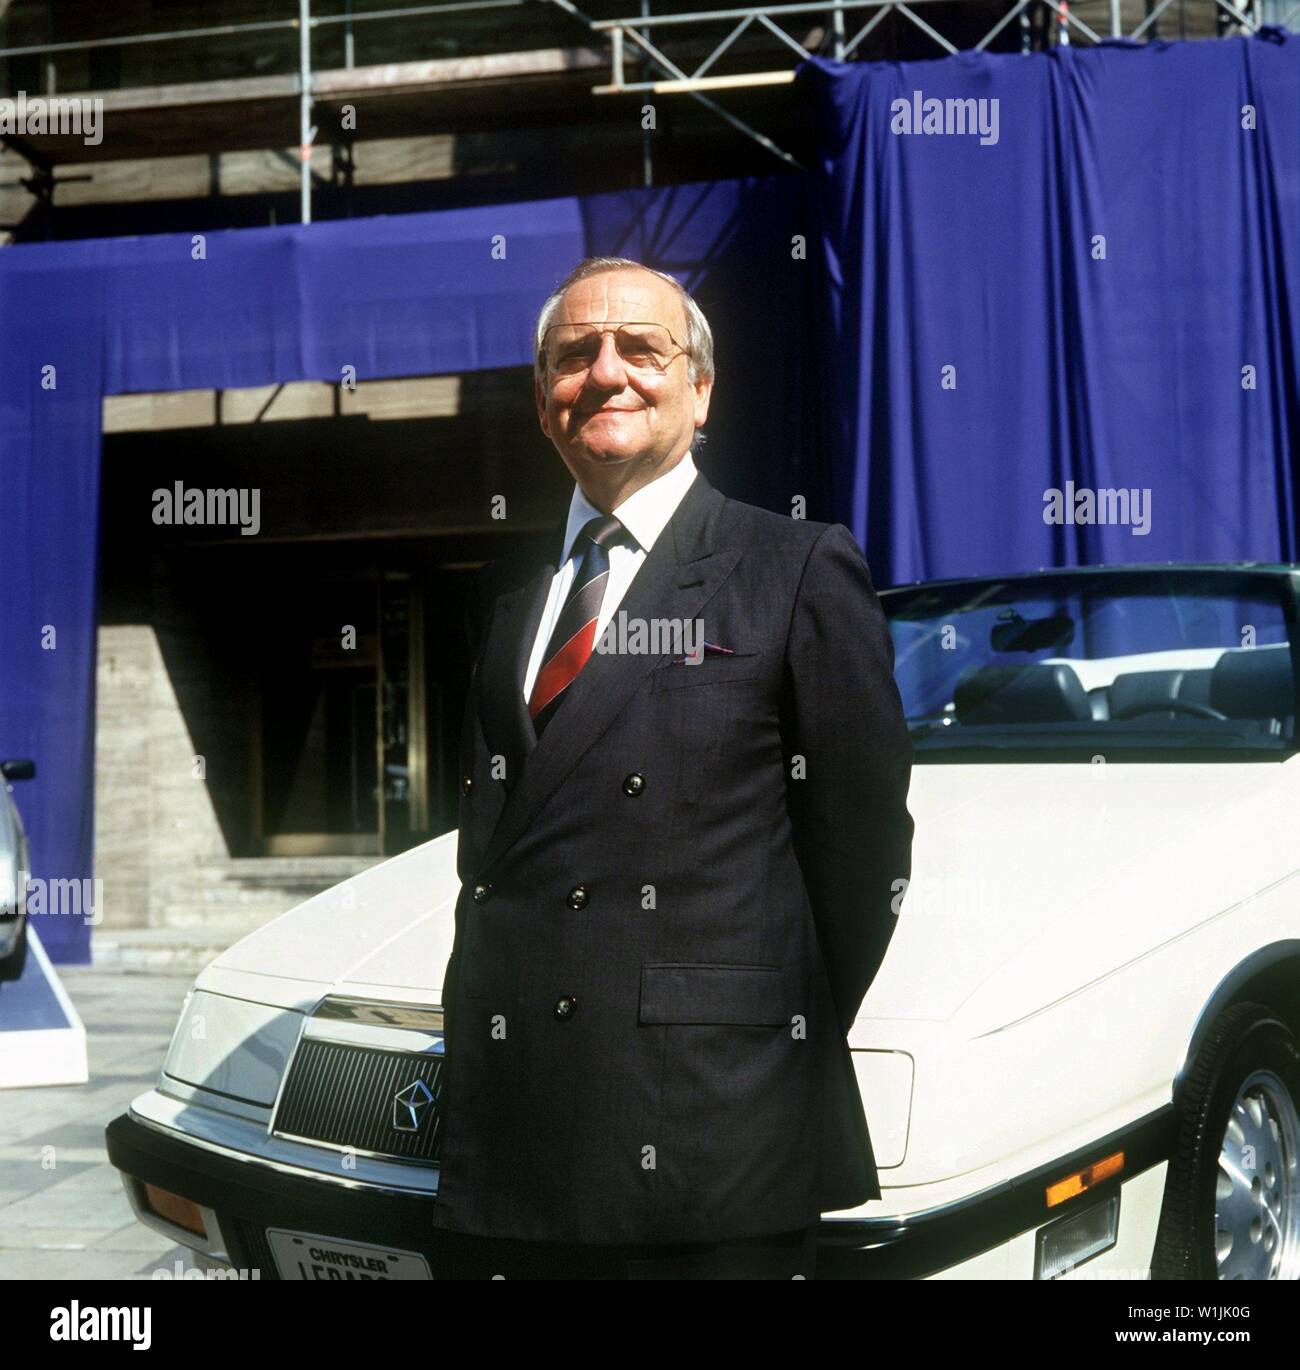 The management chairman of the American automotive group Chrysler, Lee Iacocca, taken on September 8, 1987 at the International Motor Show (IAA) in Frankfurt am Main in front of a Chrysler model. | usage worldwide Stock Photo